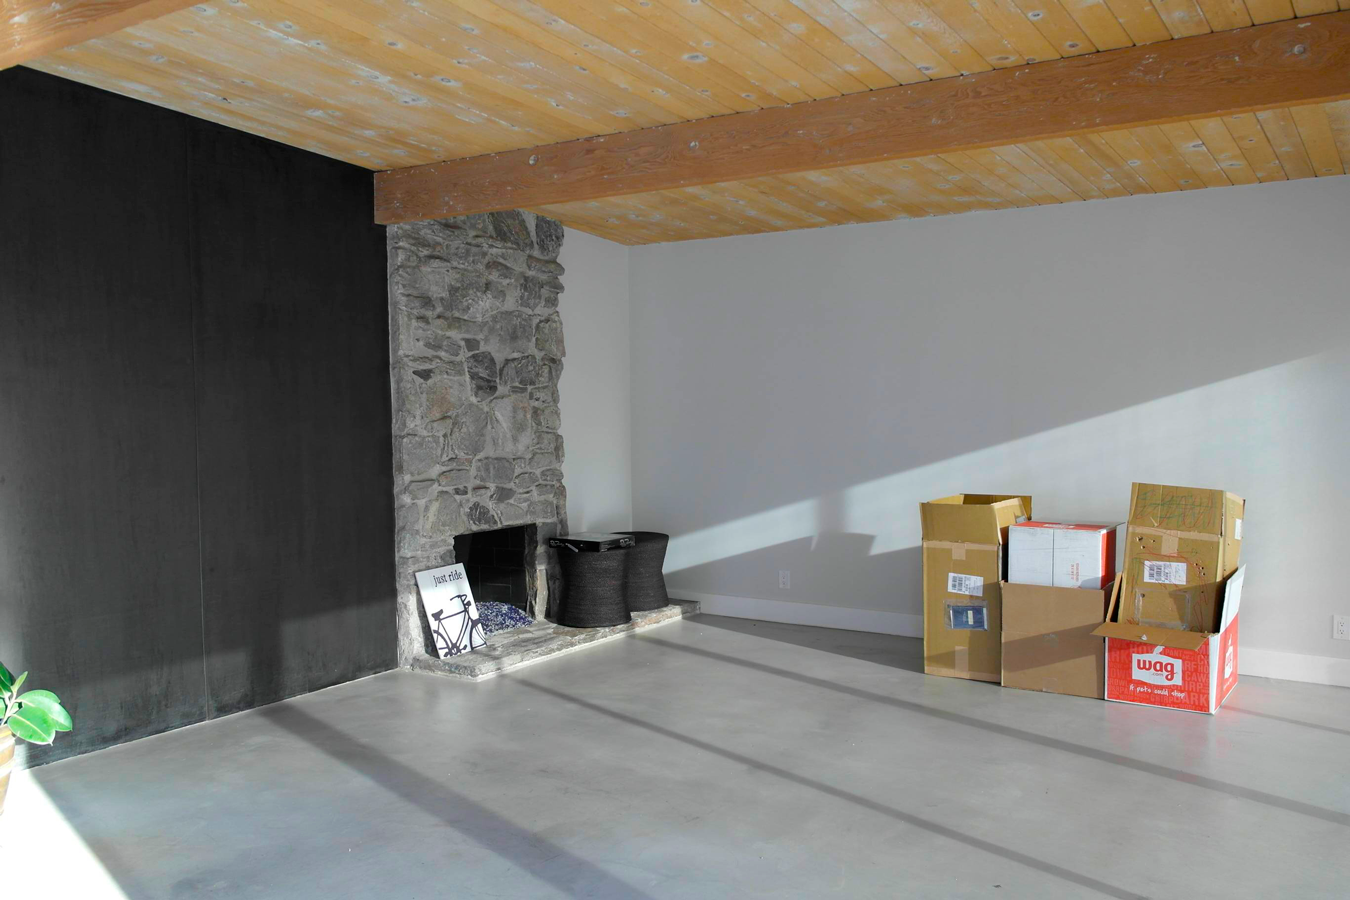 A living room with a fireplace and boxes on the floor